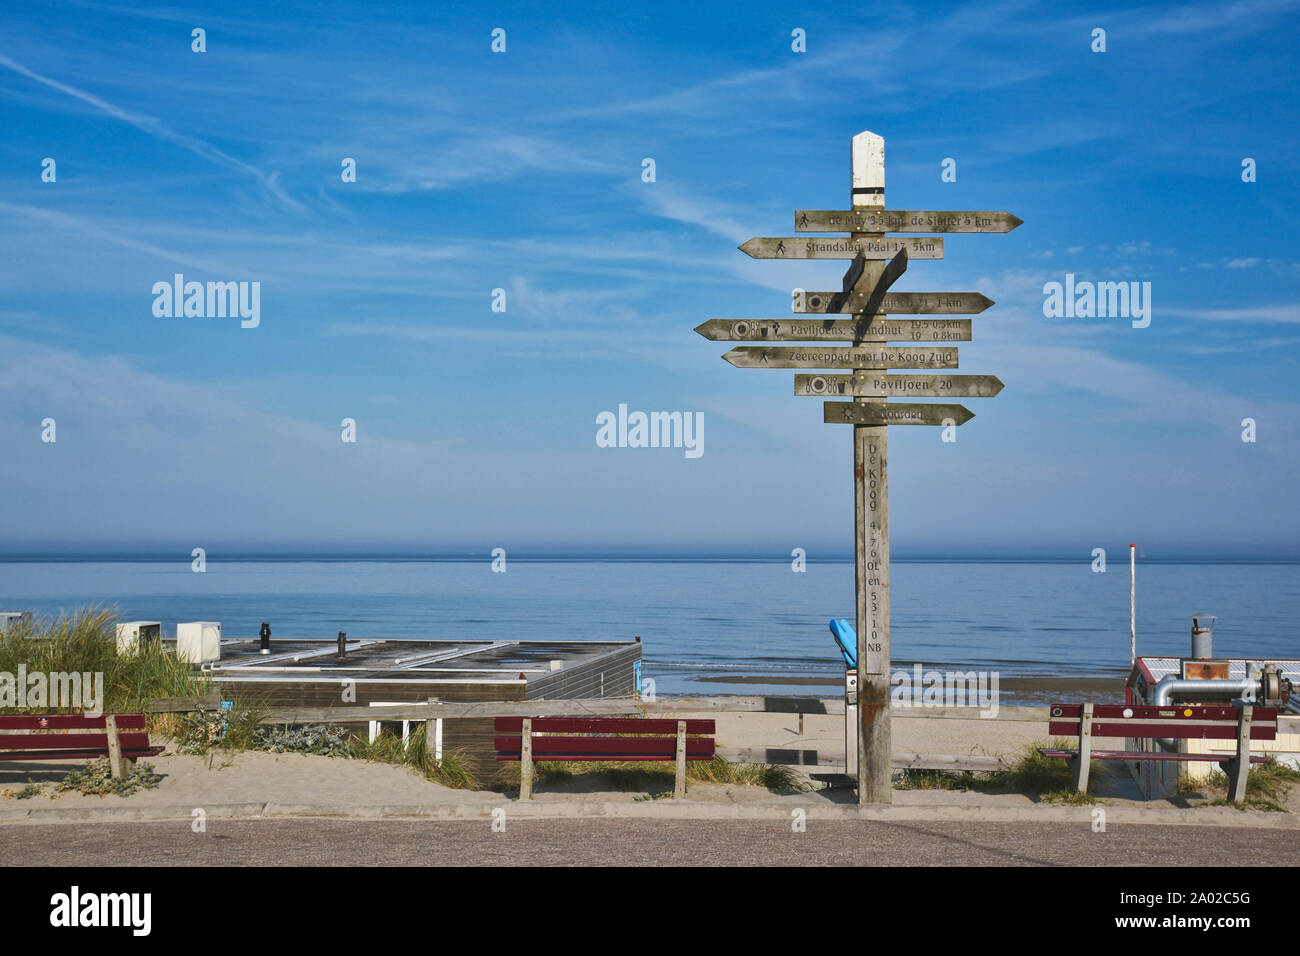 De Koog, Texel / North Netherlands - August 2019: Wooden signpost showing in multiple different directions at beach on island Texel Stock Photo